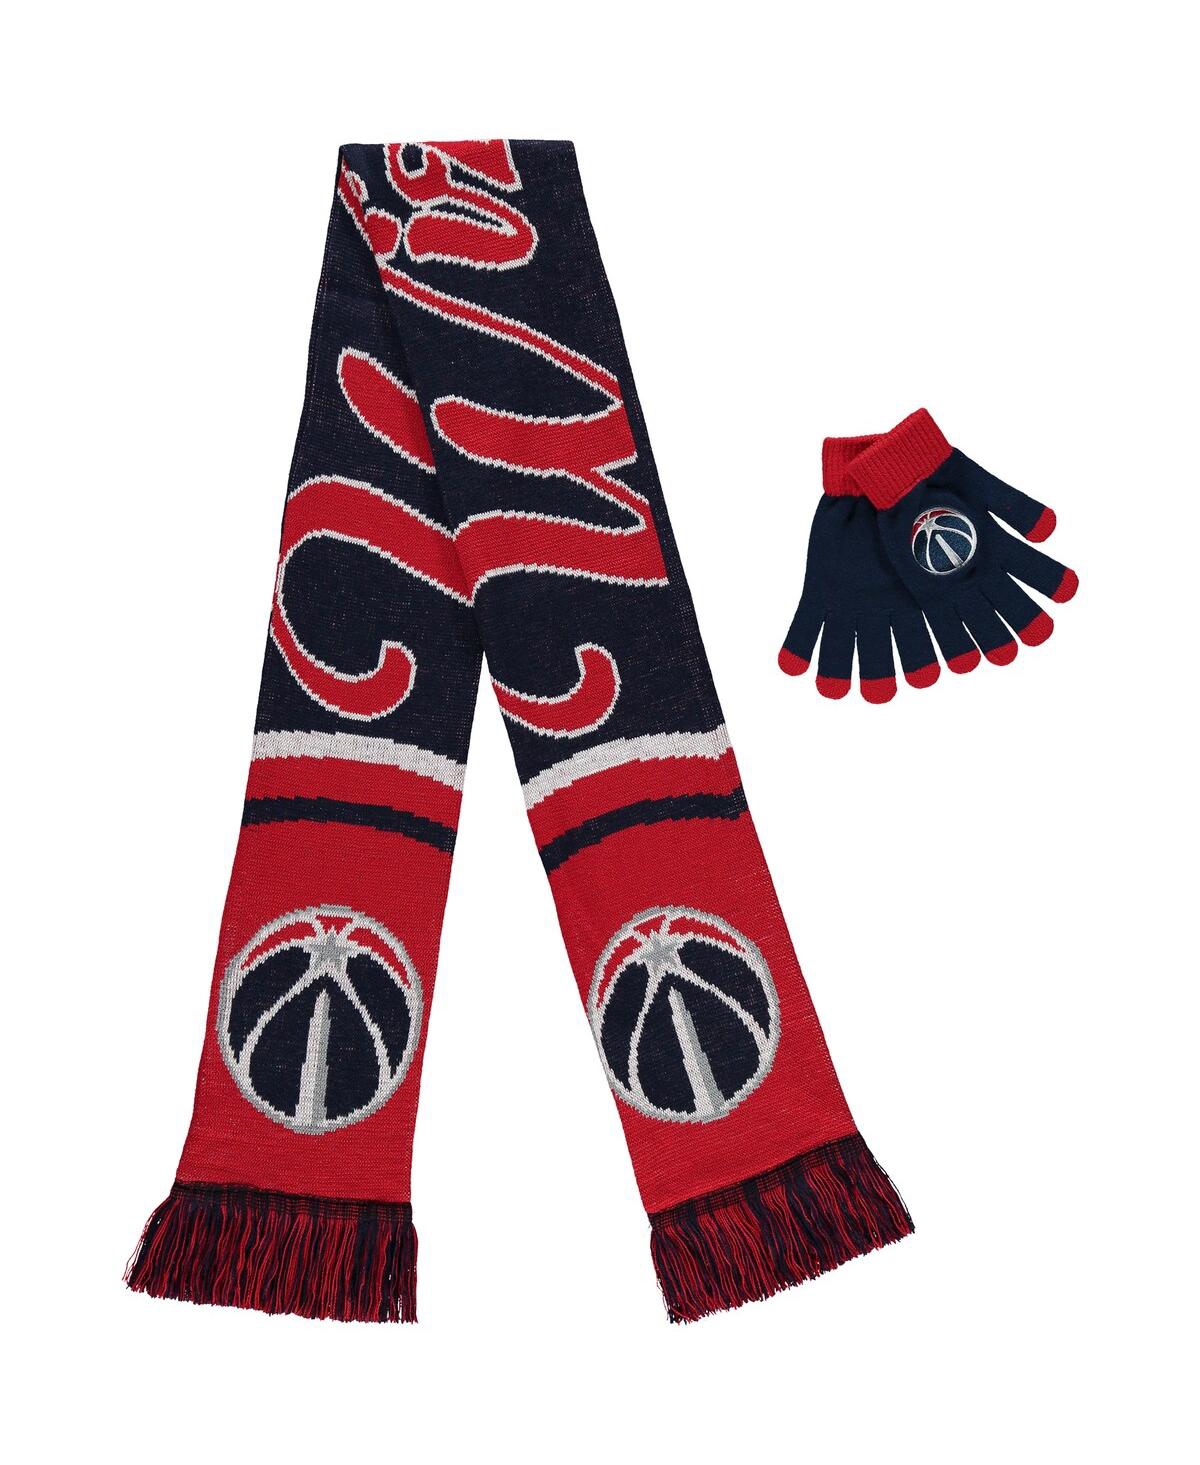 Men's and Women's Washington Wizards Gloves and Scarf Set - Multi